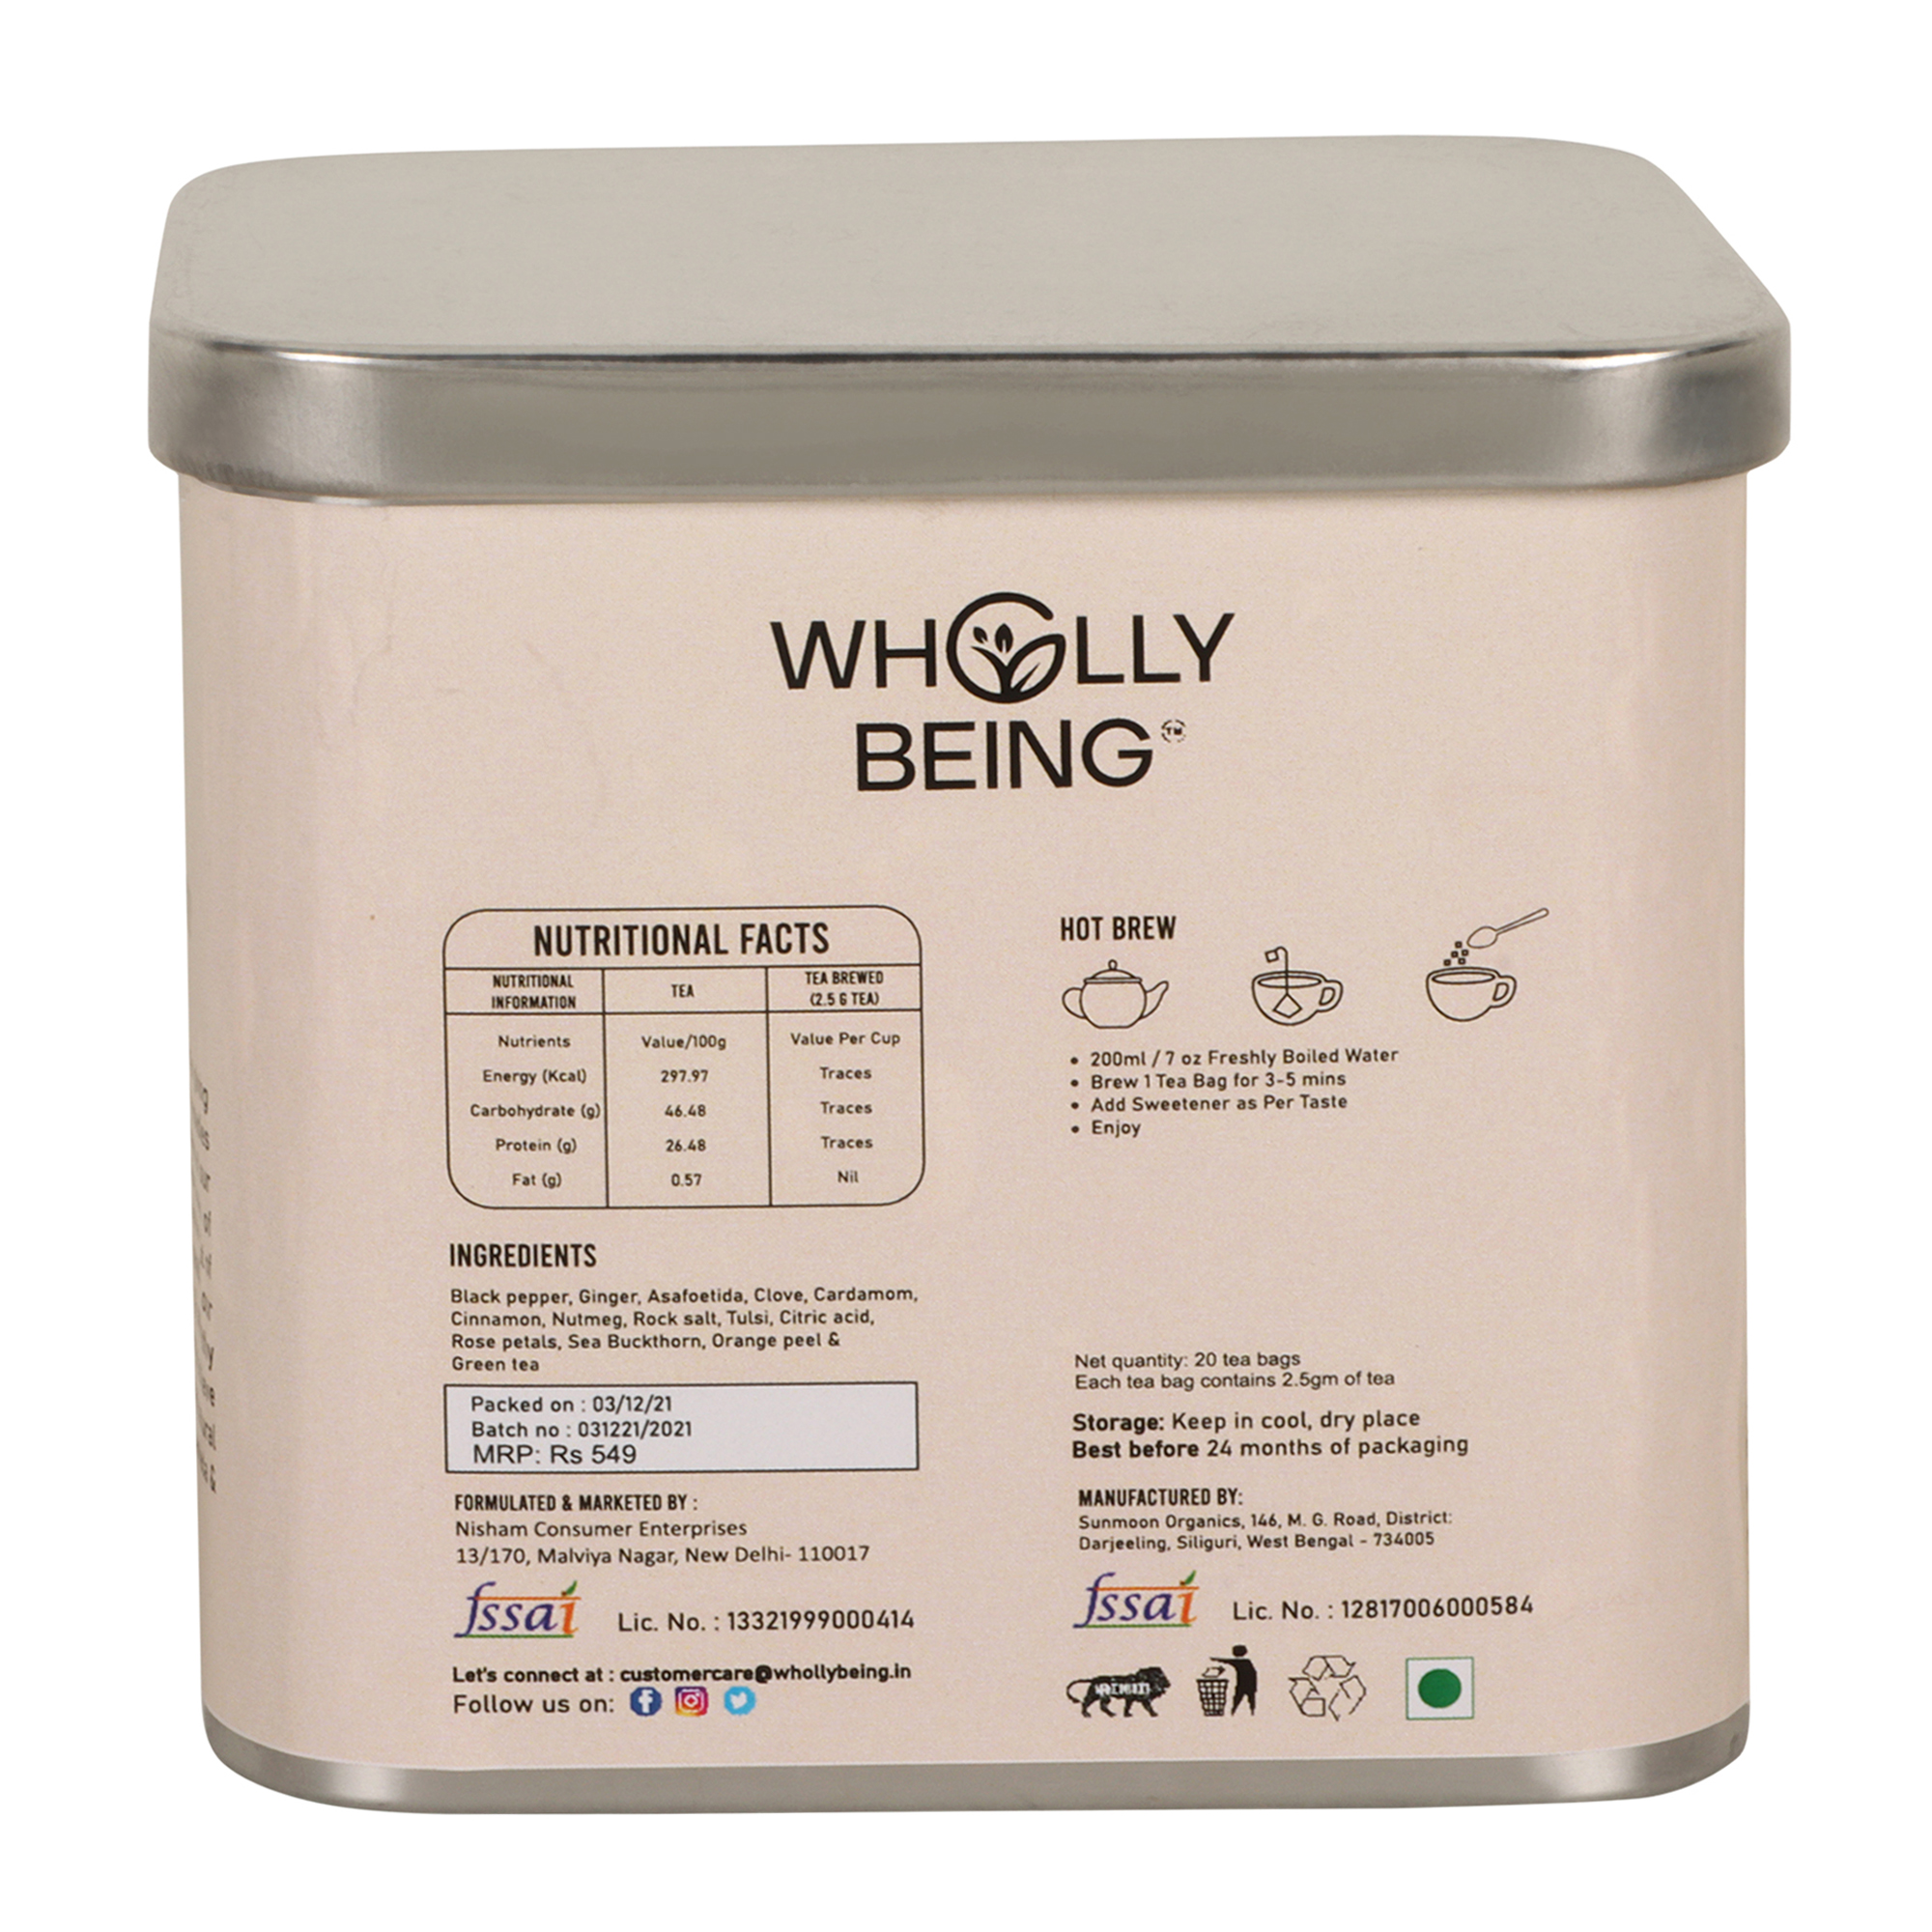 Product: Wholly Being Detox Kahwa Tea Bags